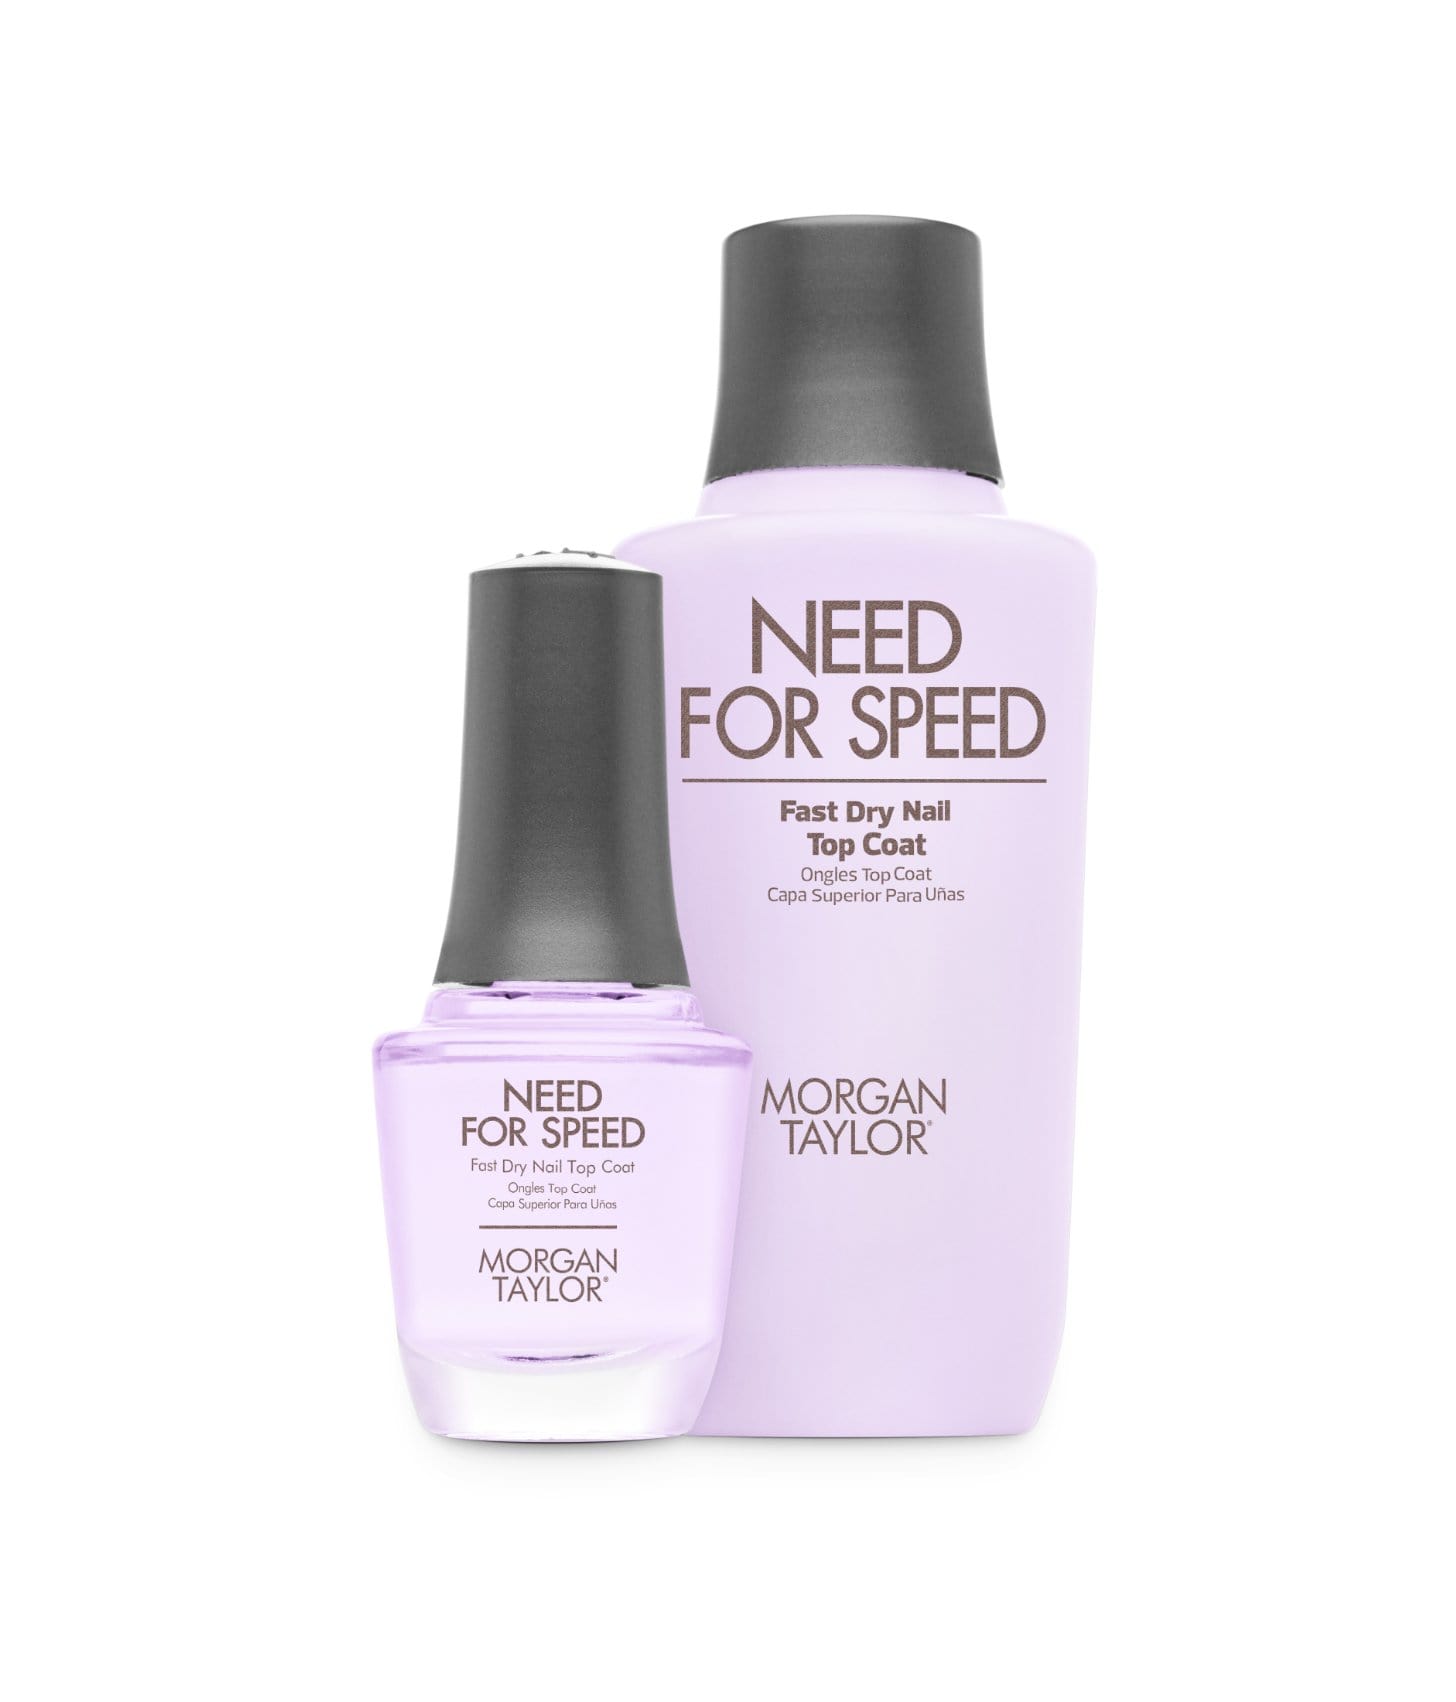 NEED FOR SPEED TOP COAT PROFESSIONAL KIT - Sagema